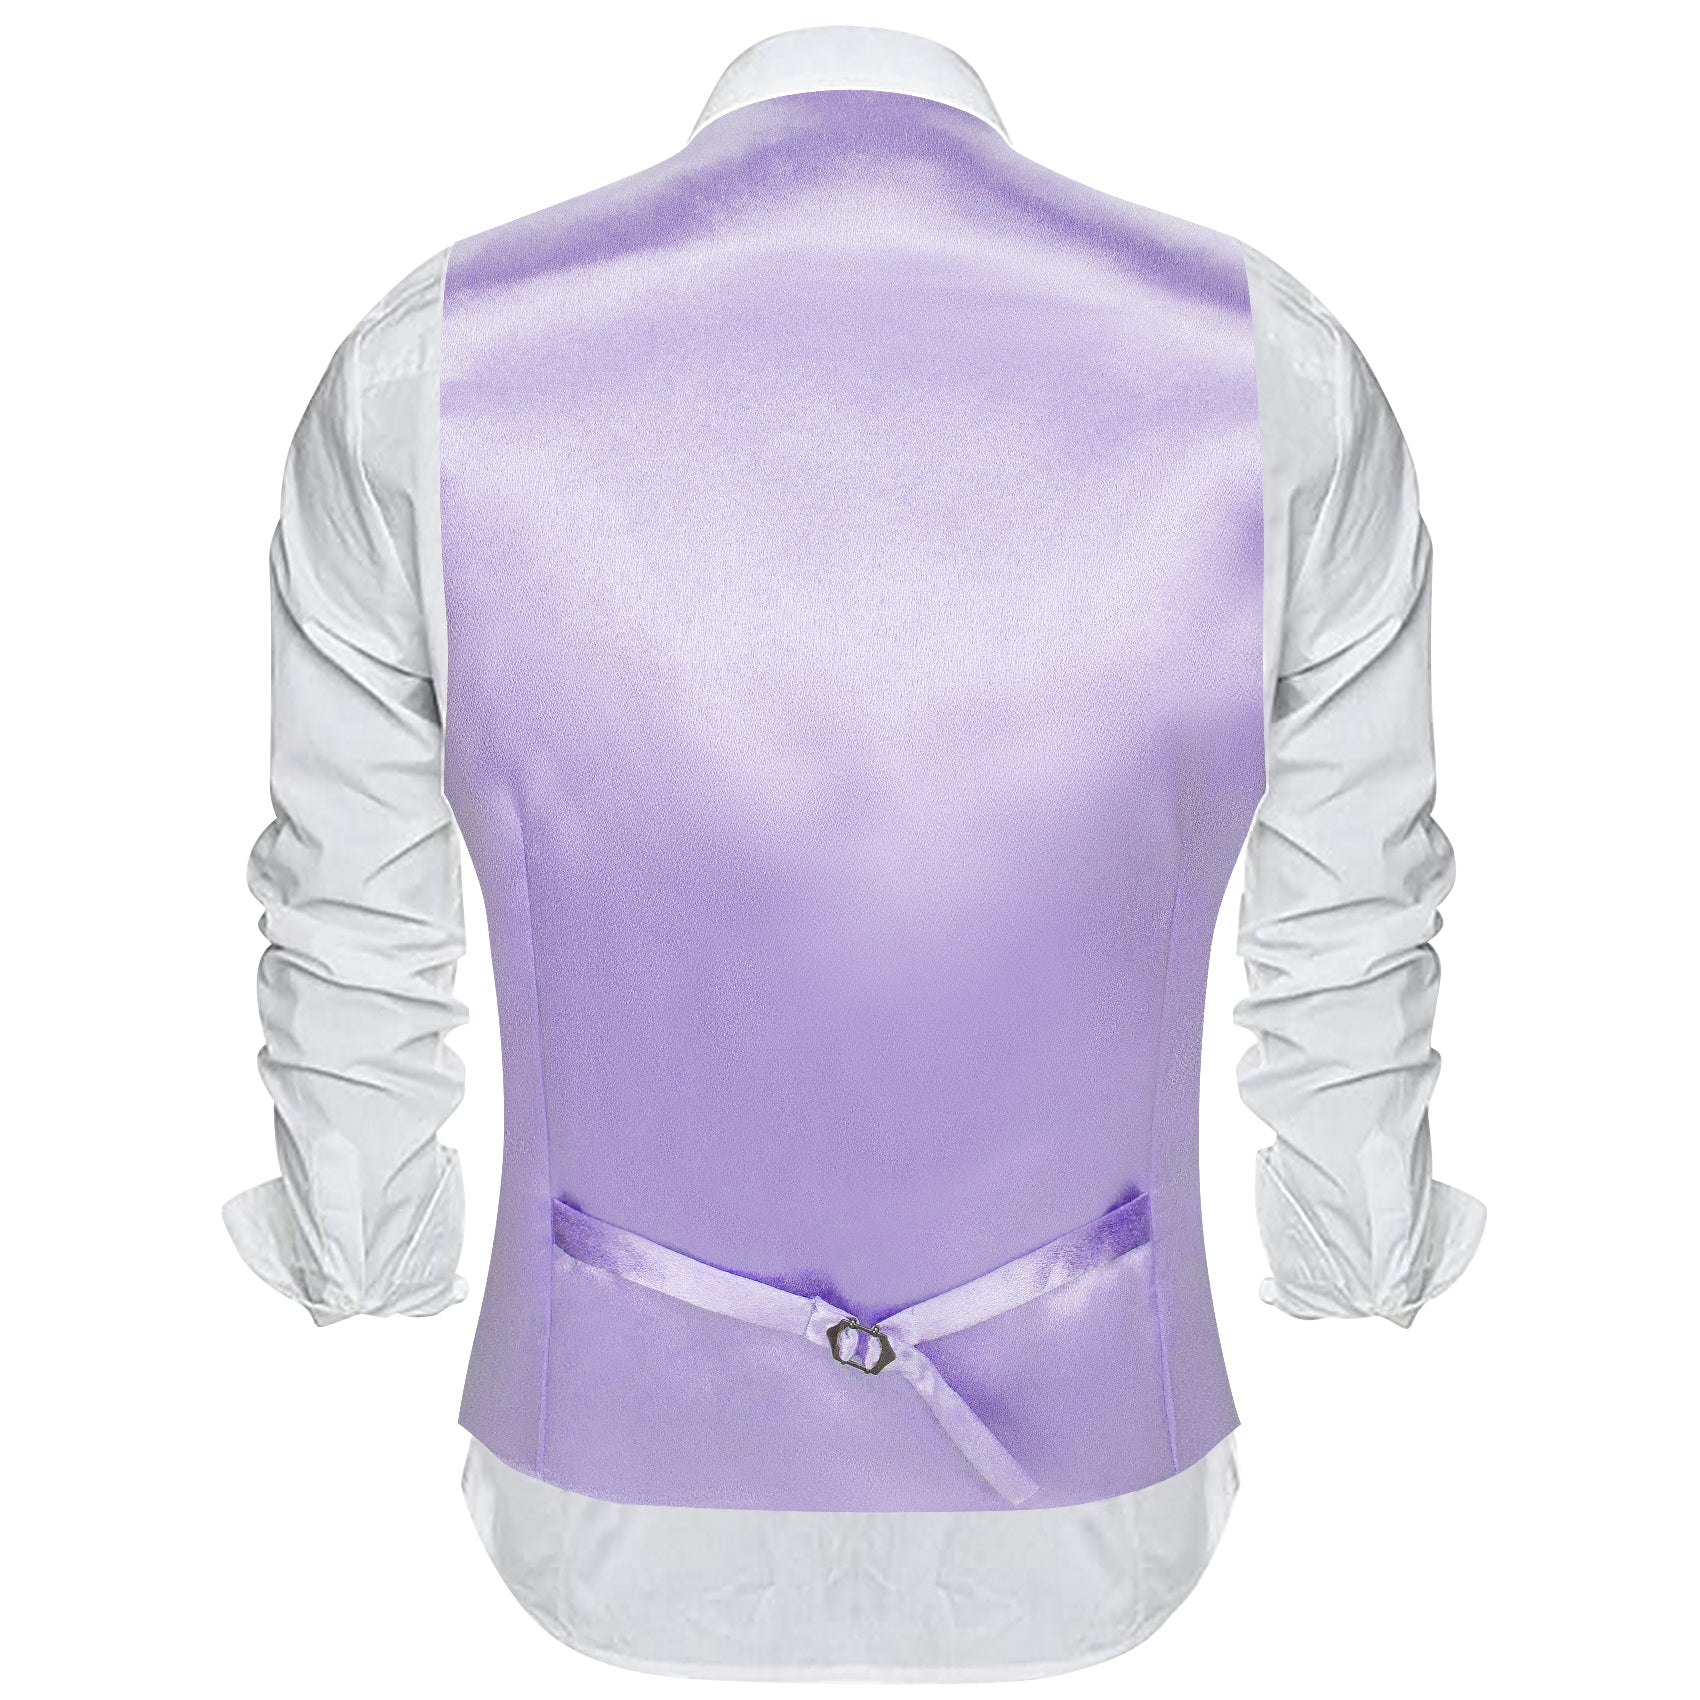 Purple Solid Silk Waistcoat Vest for Party